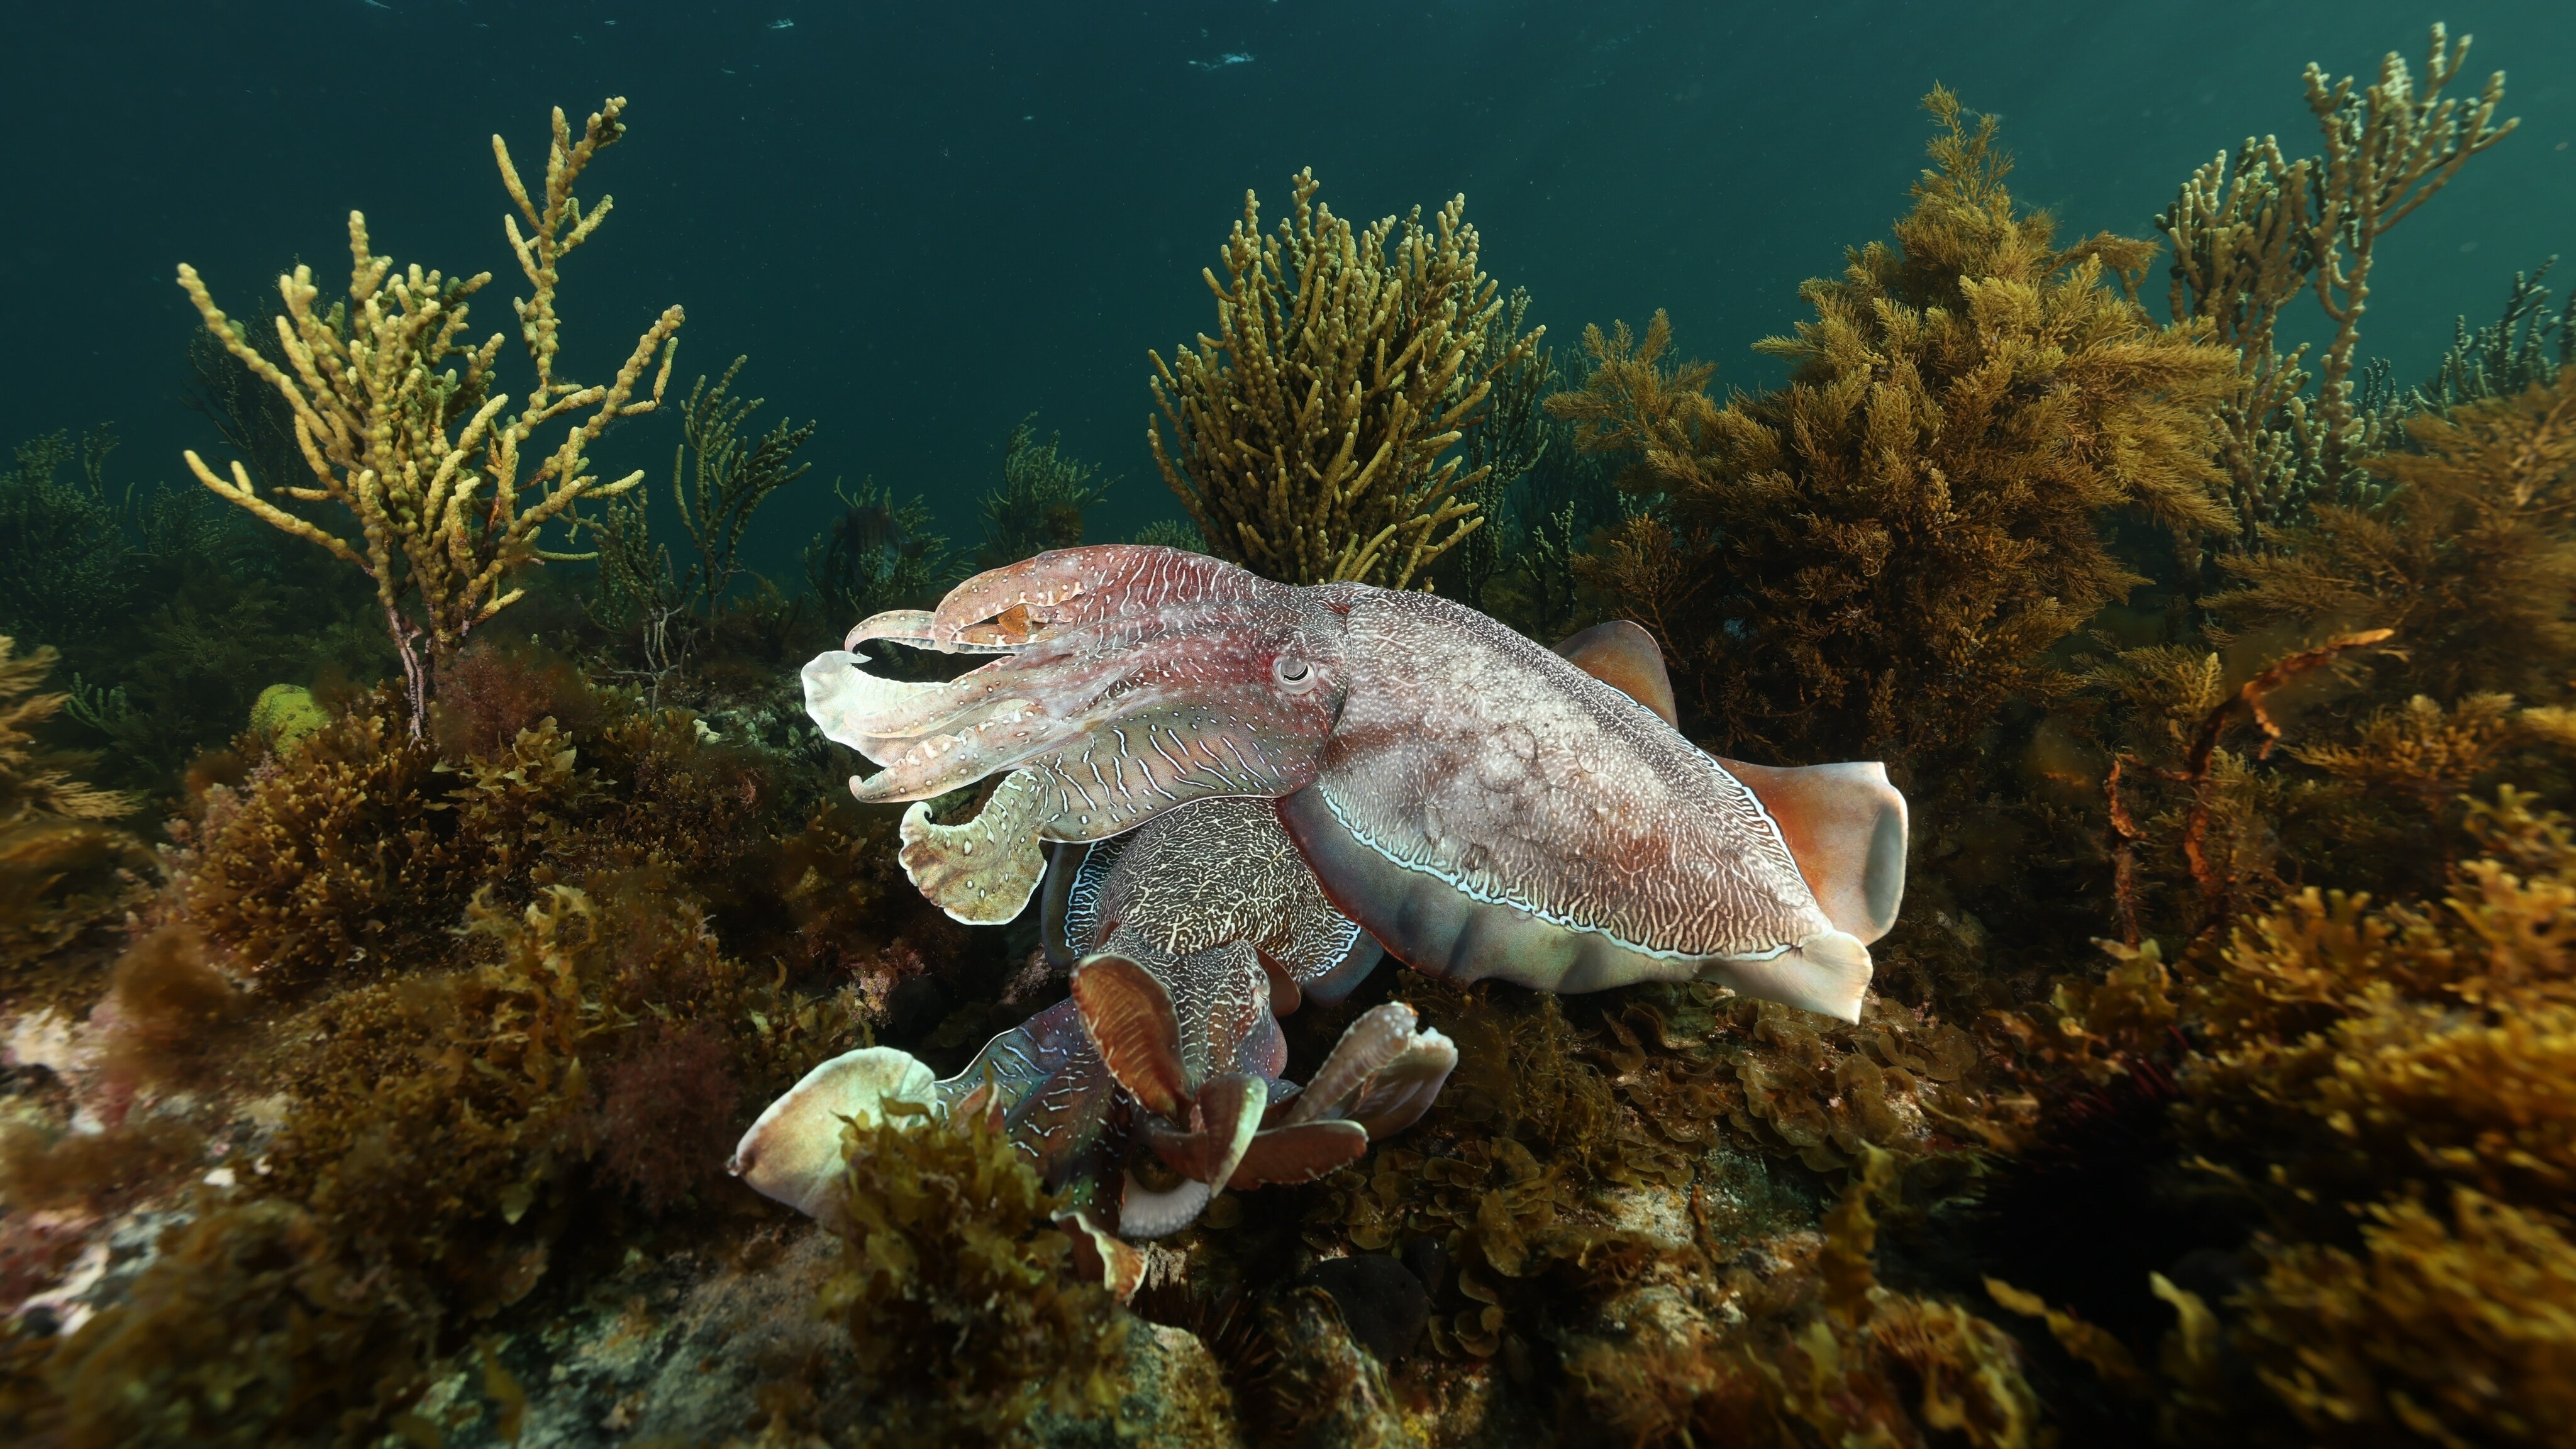 Aggregtion of giant cuttlefish.  (National Geographic for Disney+/Stefan Andrews)